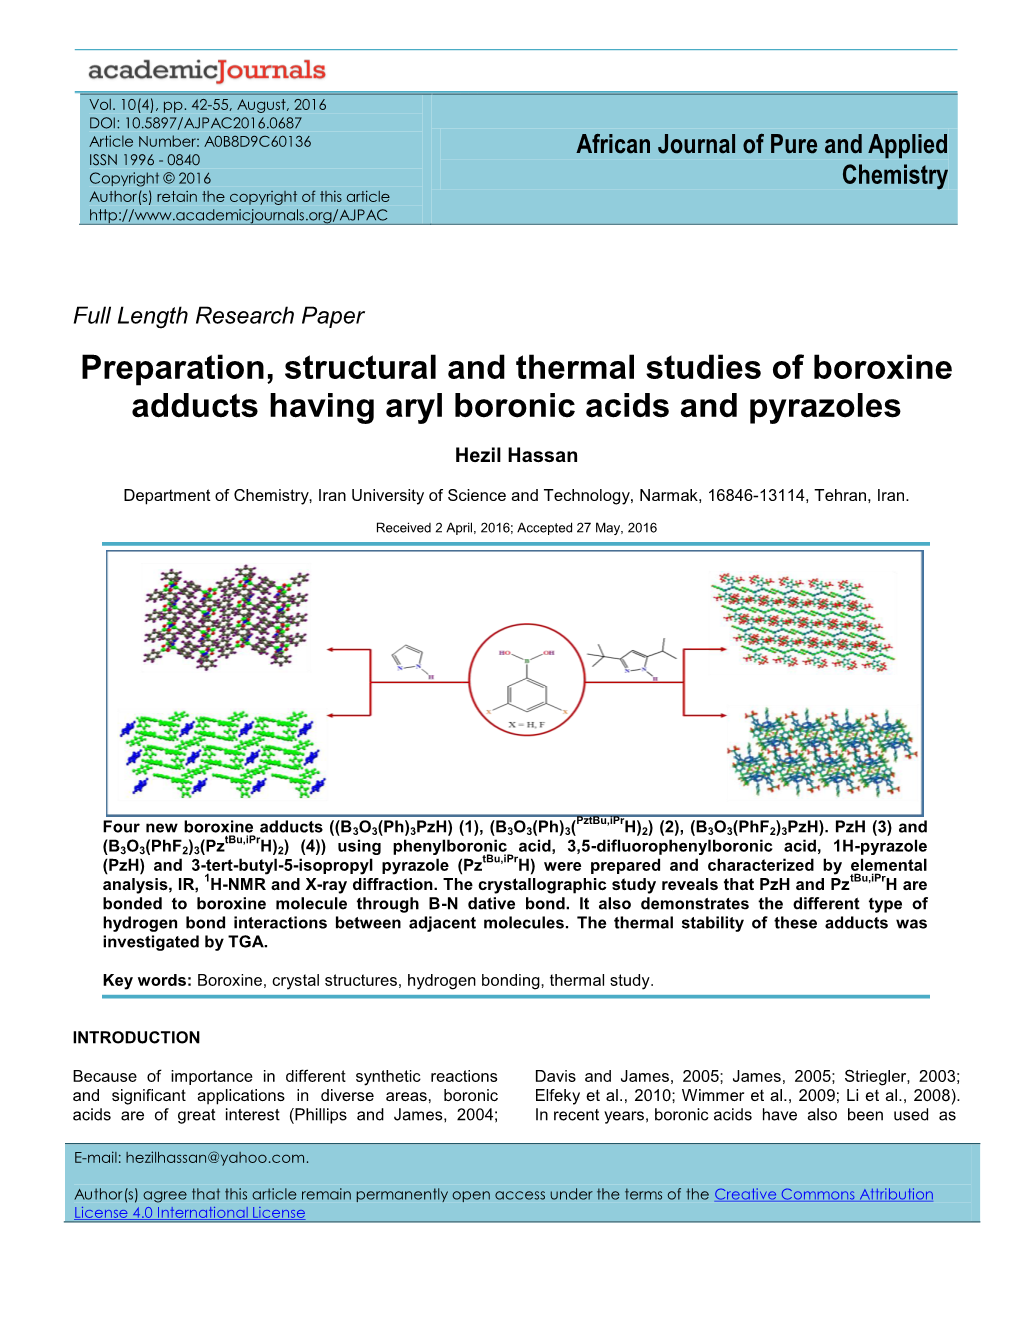 Preparation, Structural and Thermal Studies of Boroxine Adducts Having Aryl Boronic Acids and Pyrazoles